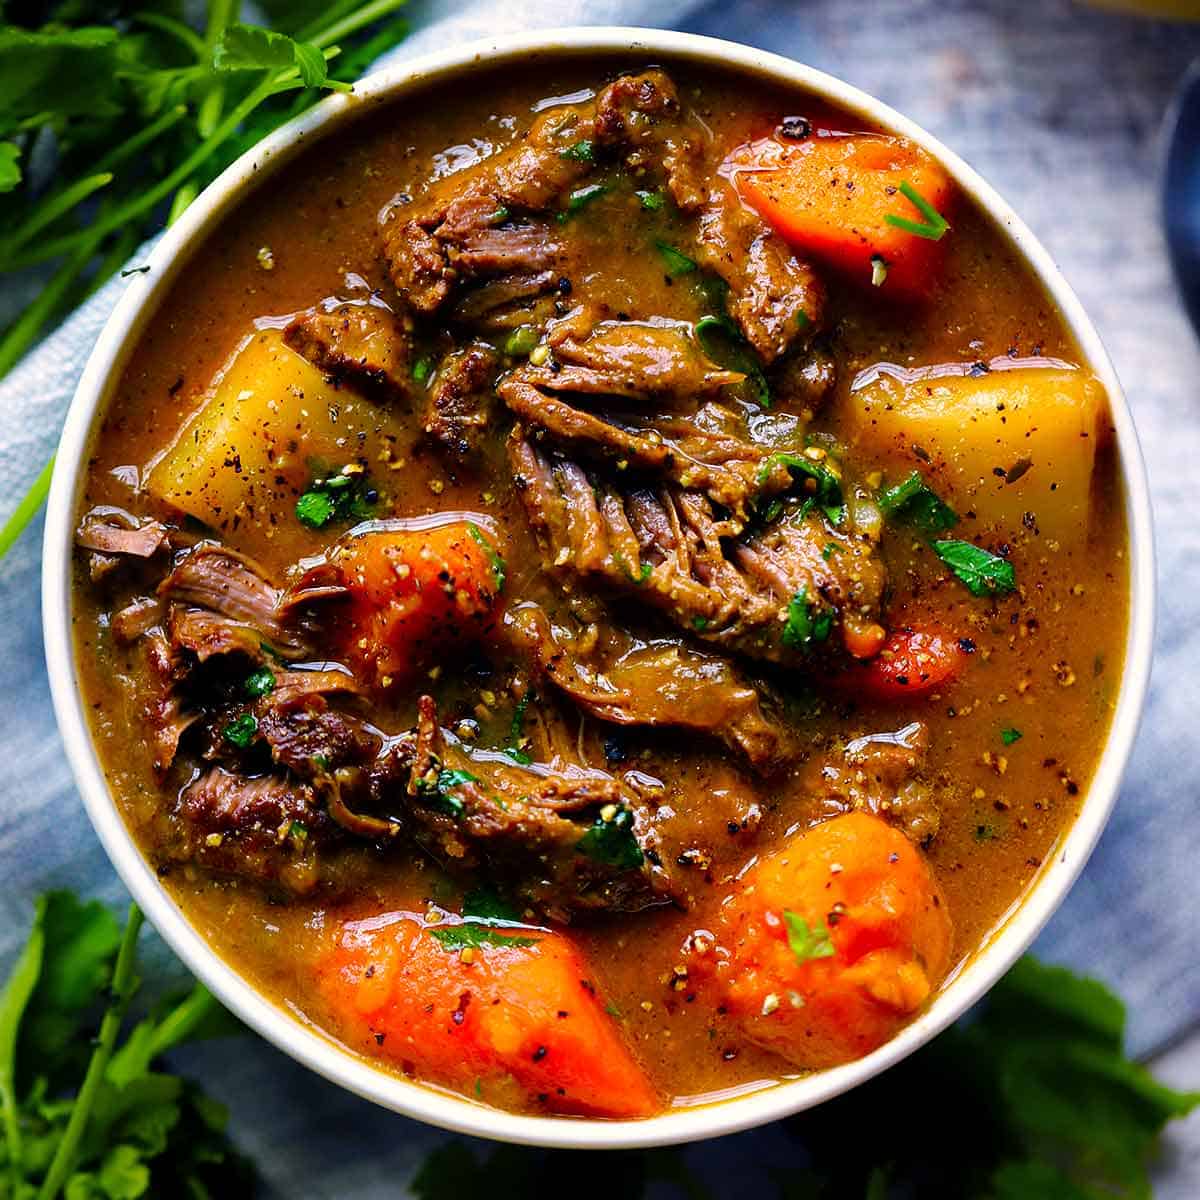 This simple Irish Lamb and Potato Stew is cooked in a dutch oven and is warm and comforting during cold weather. Sweet potatoes and dark beer are added for amazing depth of flavor, with no flour needed as a thickener. Easily adaptable to be paleo/whole30 compliant! #IrishFood #Paleo #LambStew